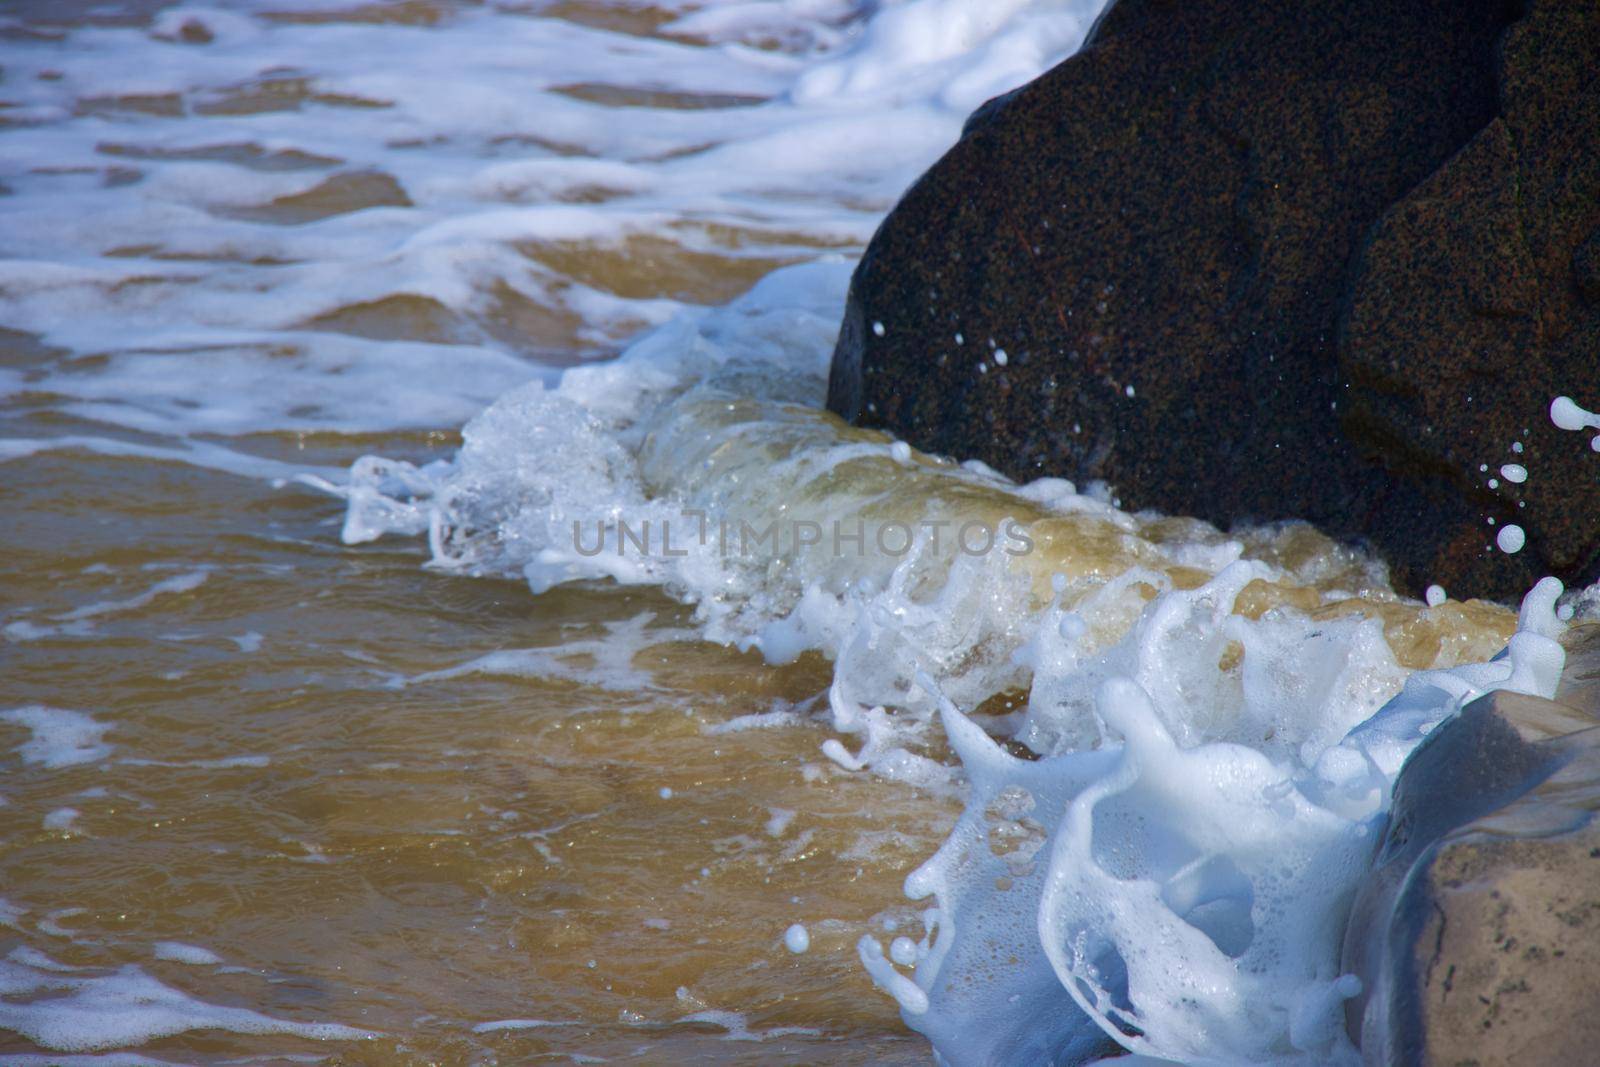 Macro photo of sea foam in motion as it crashes against dark rocks on sand beach with water droplets in the air. Norwich, Norfolk, taken with Canon EOS 90D